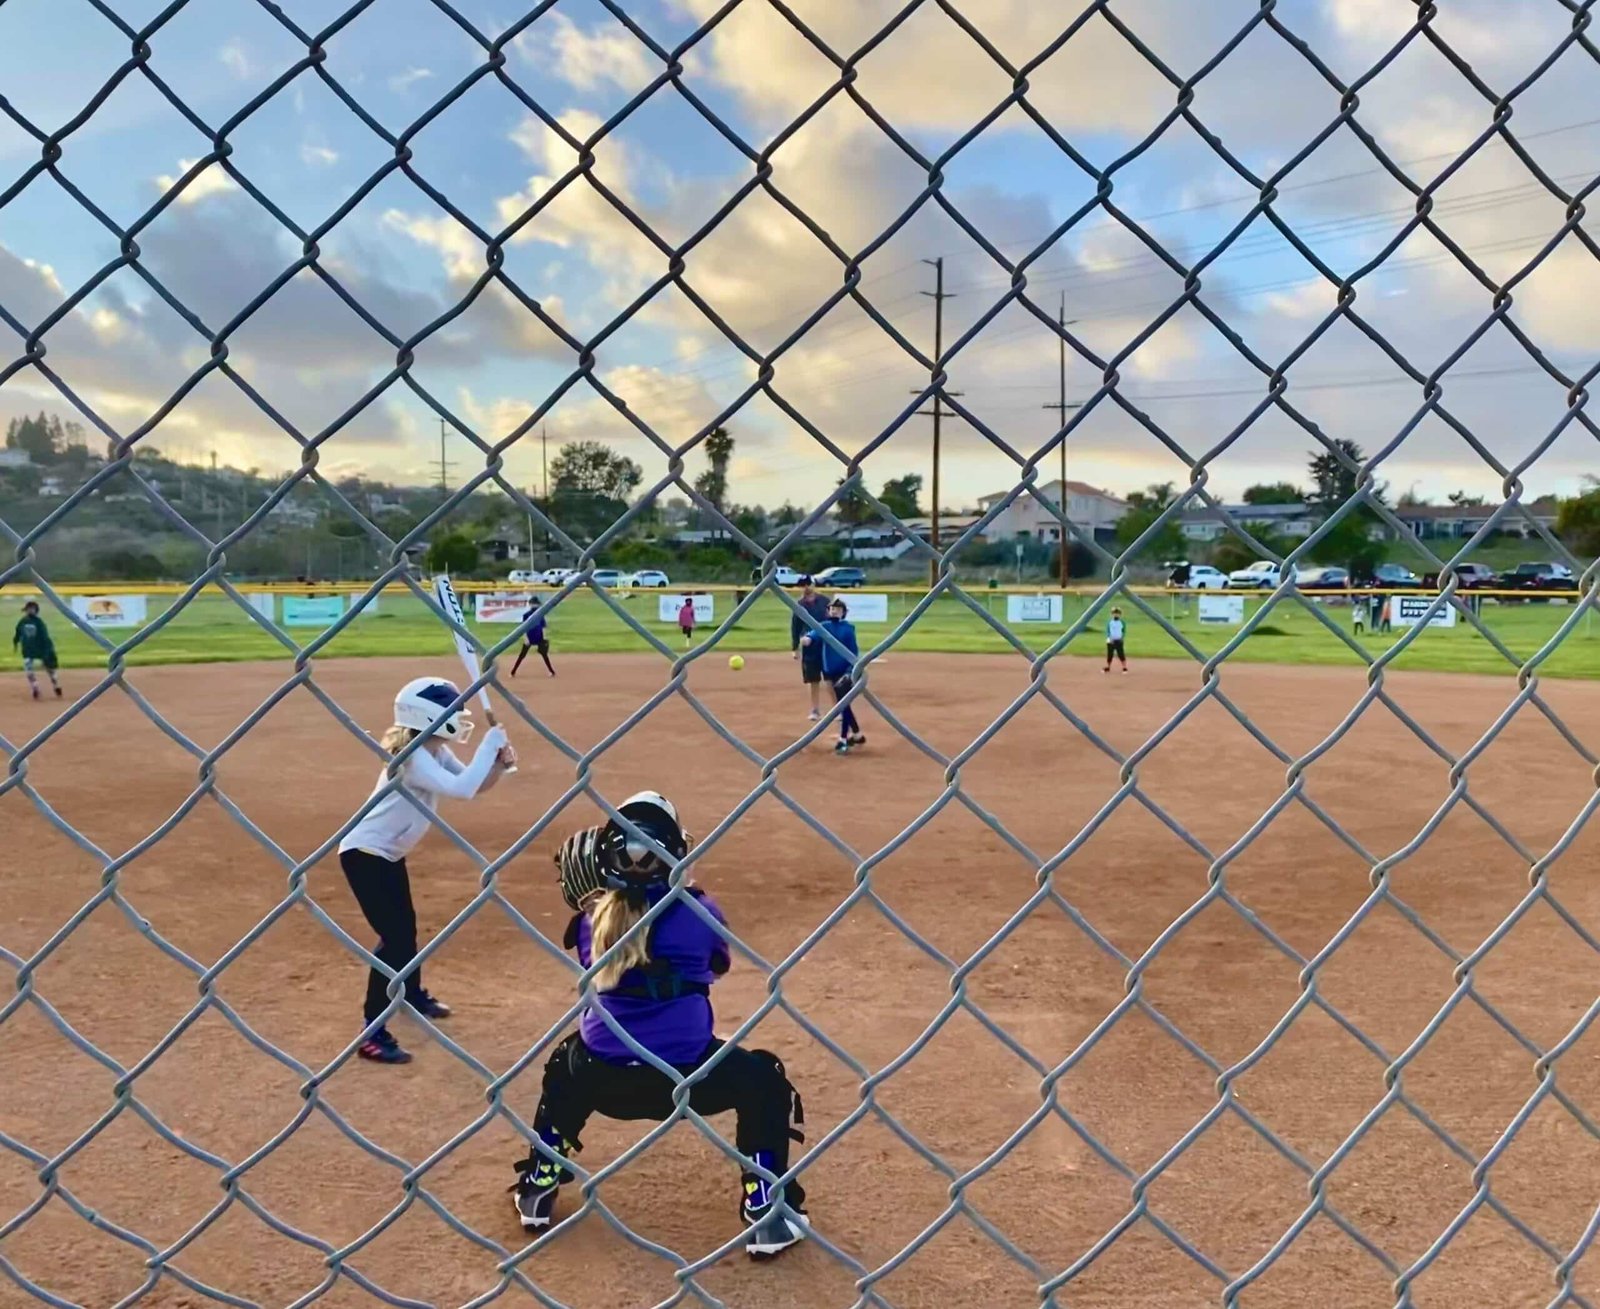 Softball Game being played by girls team Reduced